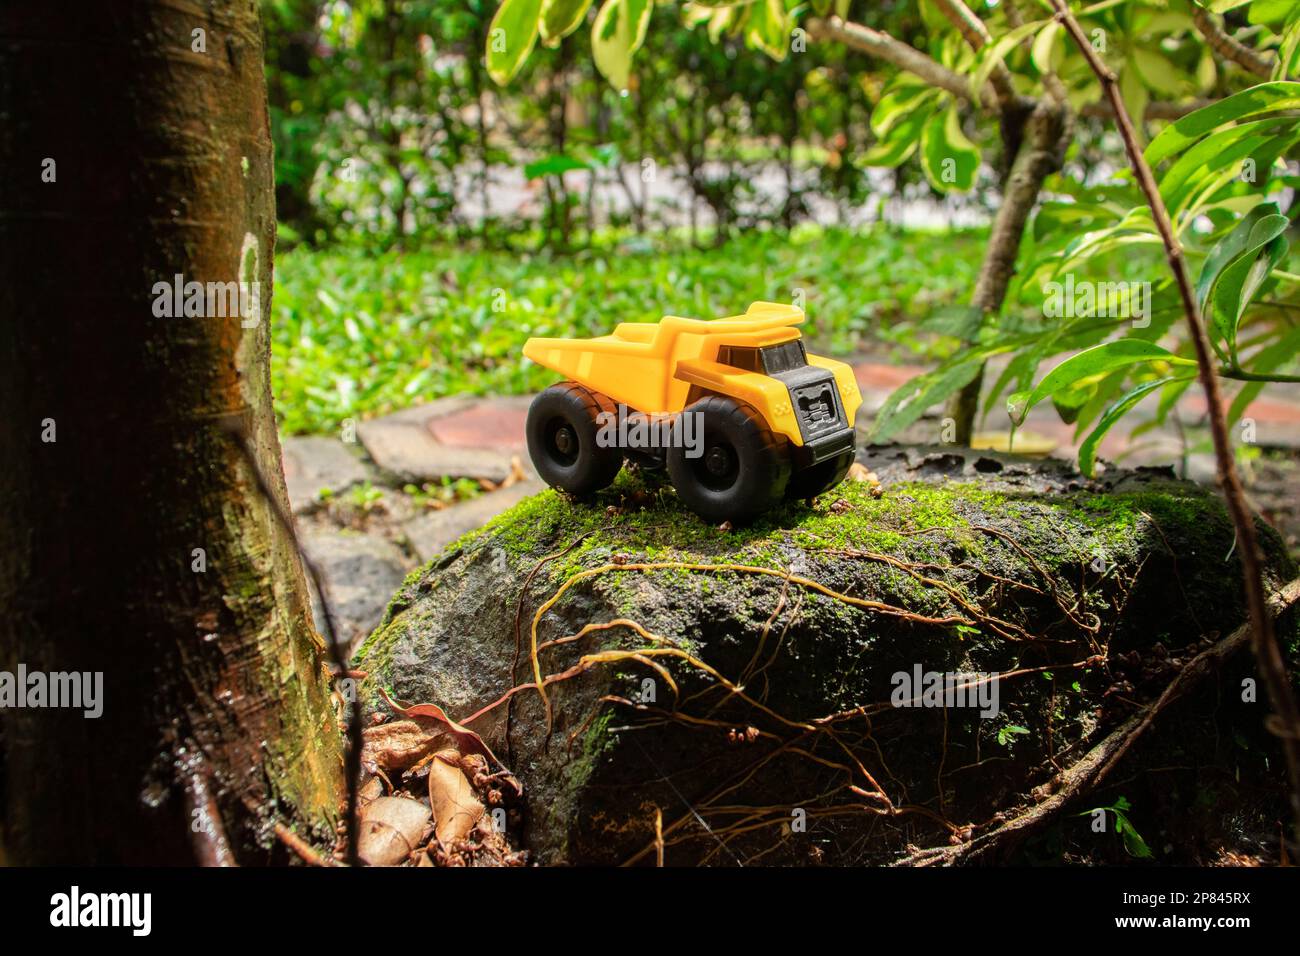 A photo after some edits. A yellow dump truck on a mossy stone. Stock Photo